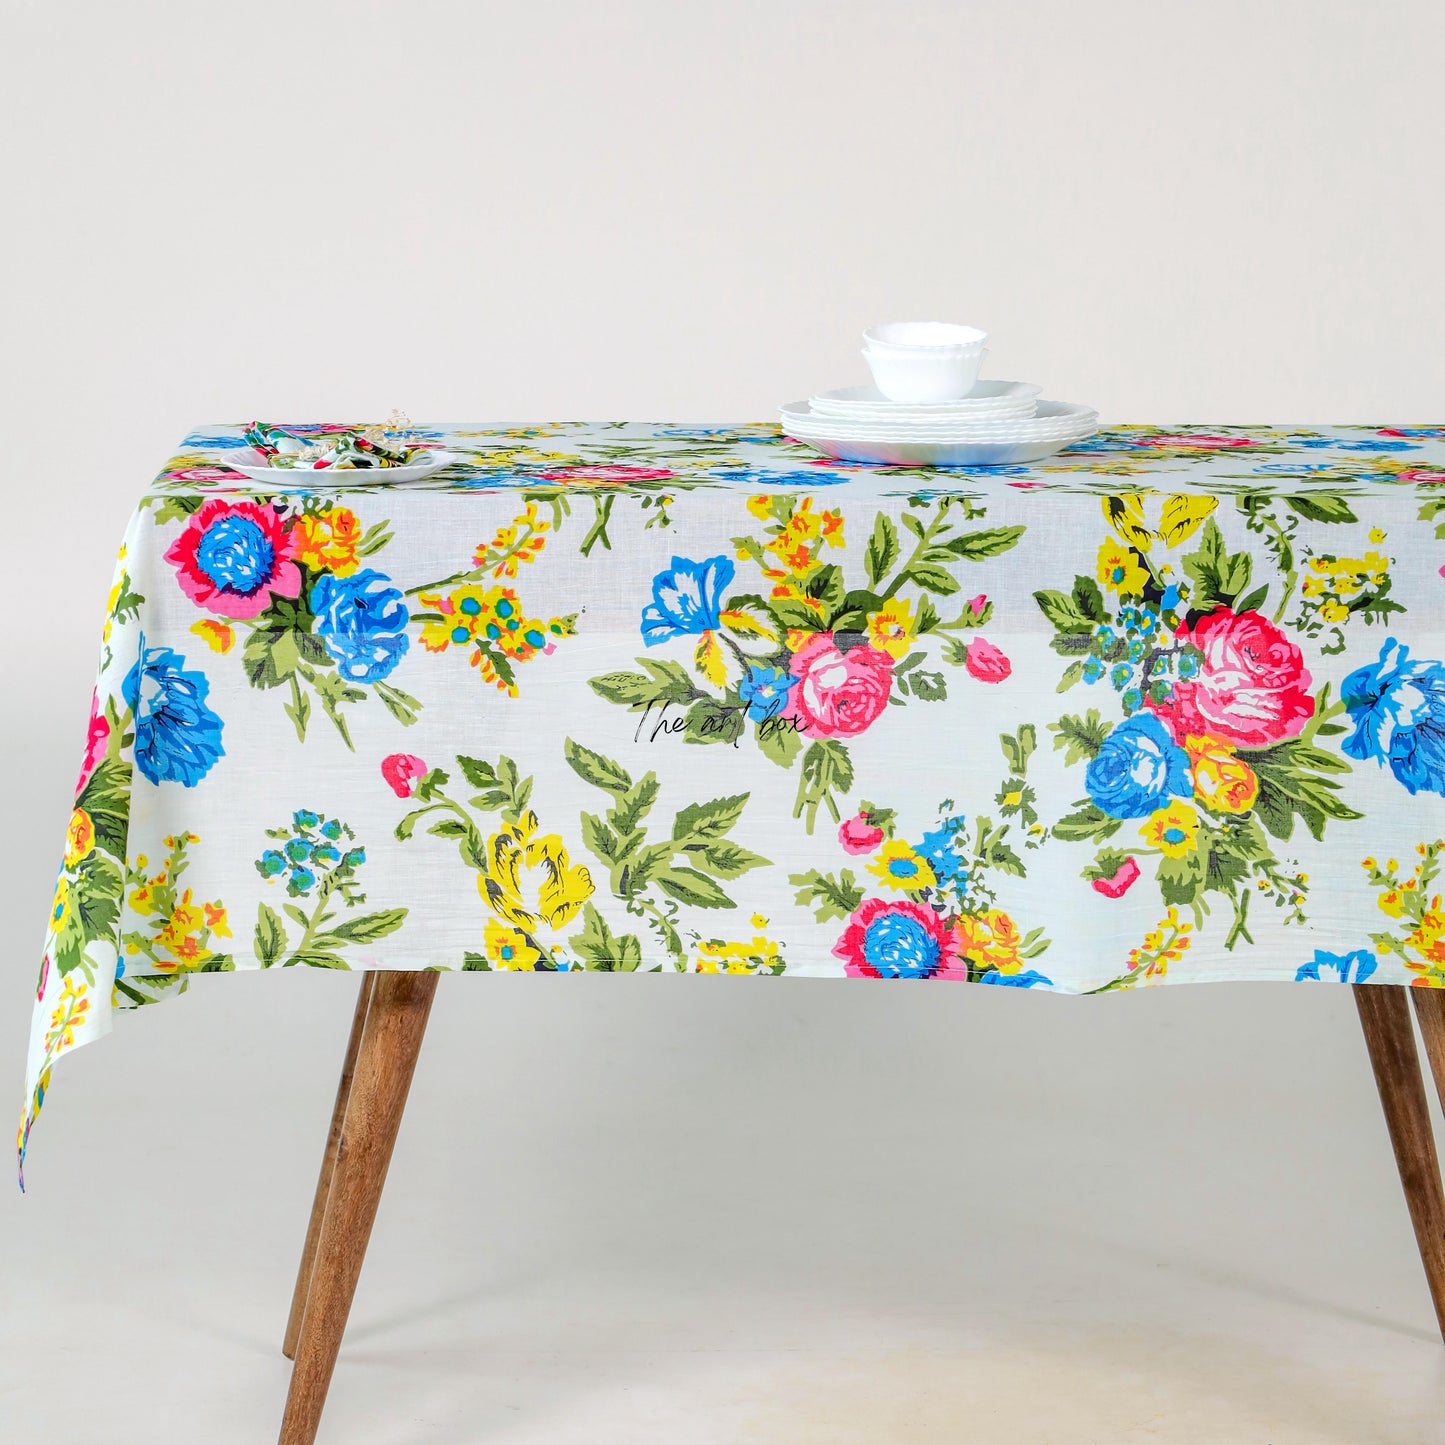 New Collection Of  Printed Table Cloth, White Floral Printed Cotton Table Cover